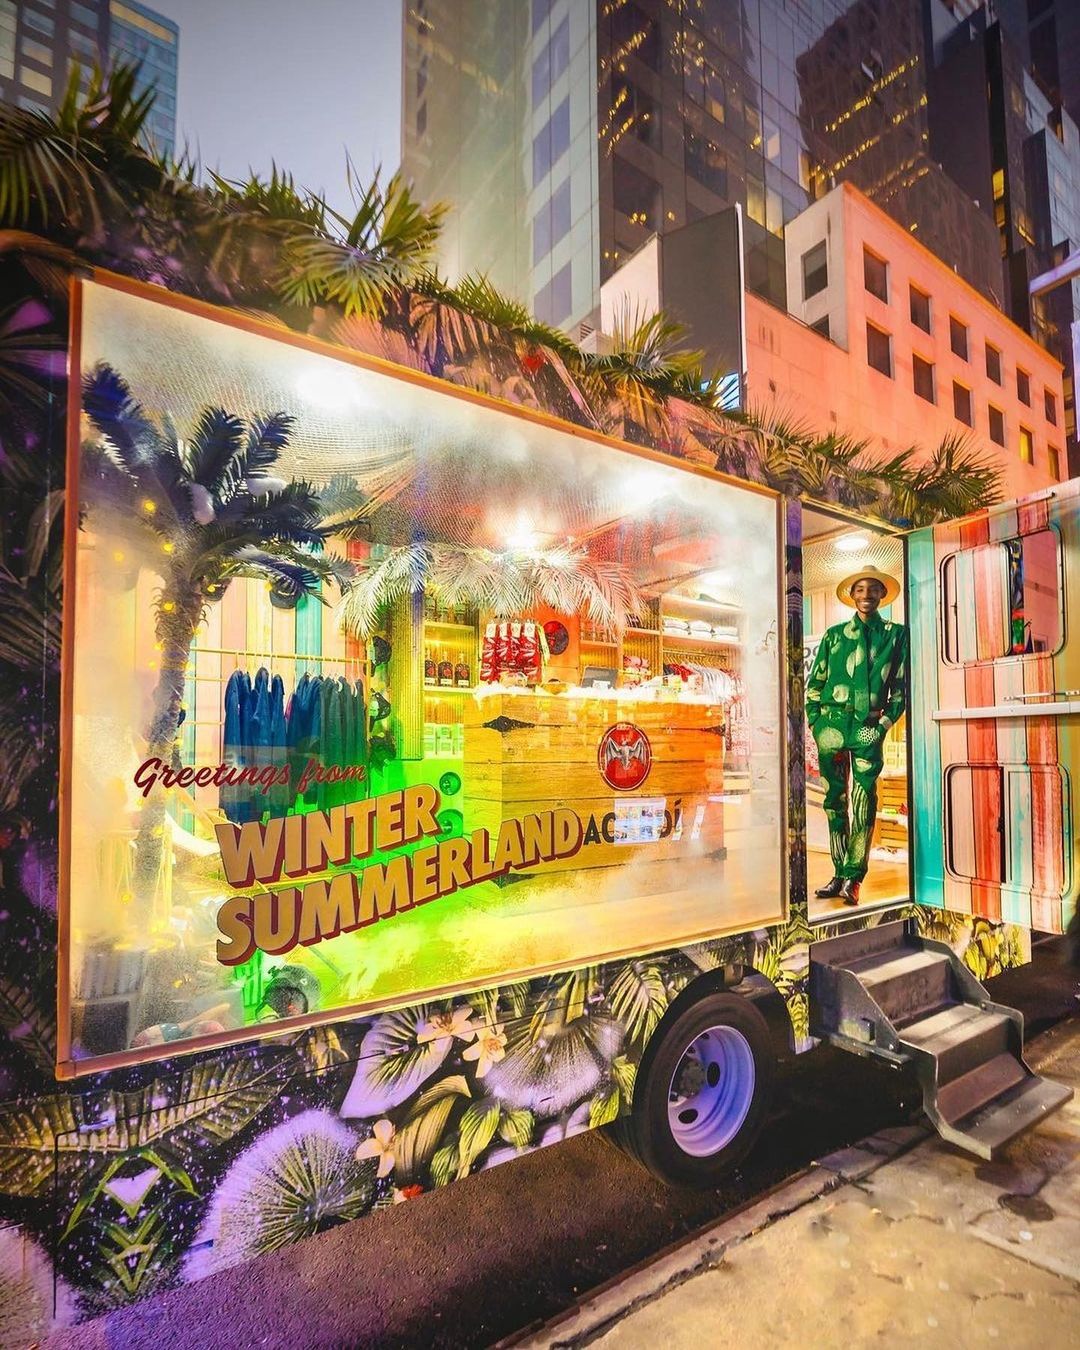 Bacardi Experiential Marketing Winter Campaign